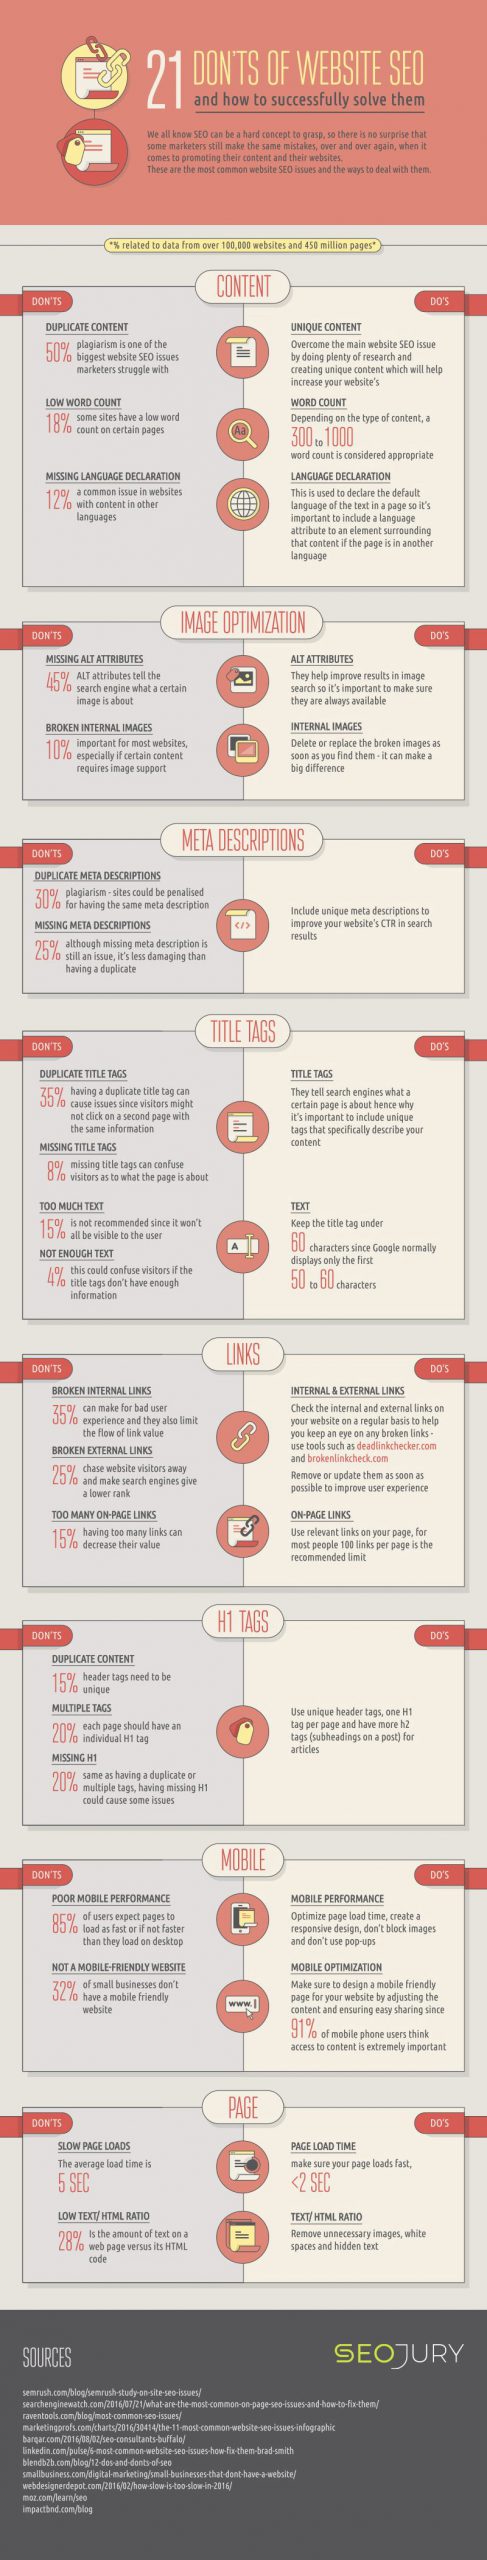 21 seo mistakes destroying your website infographic scaled 1